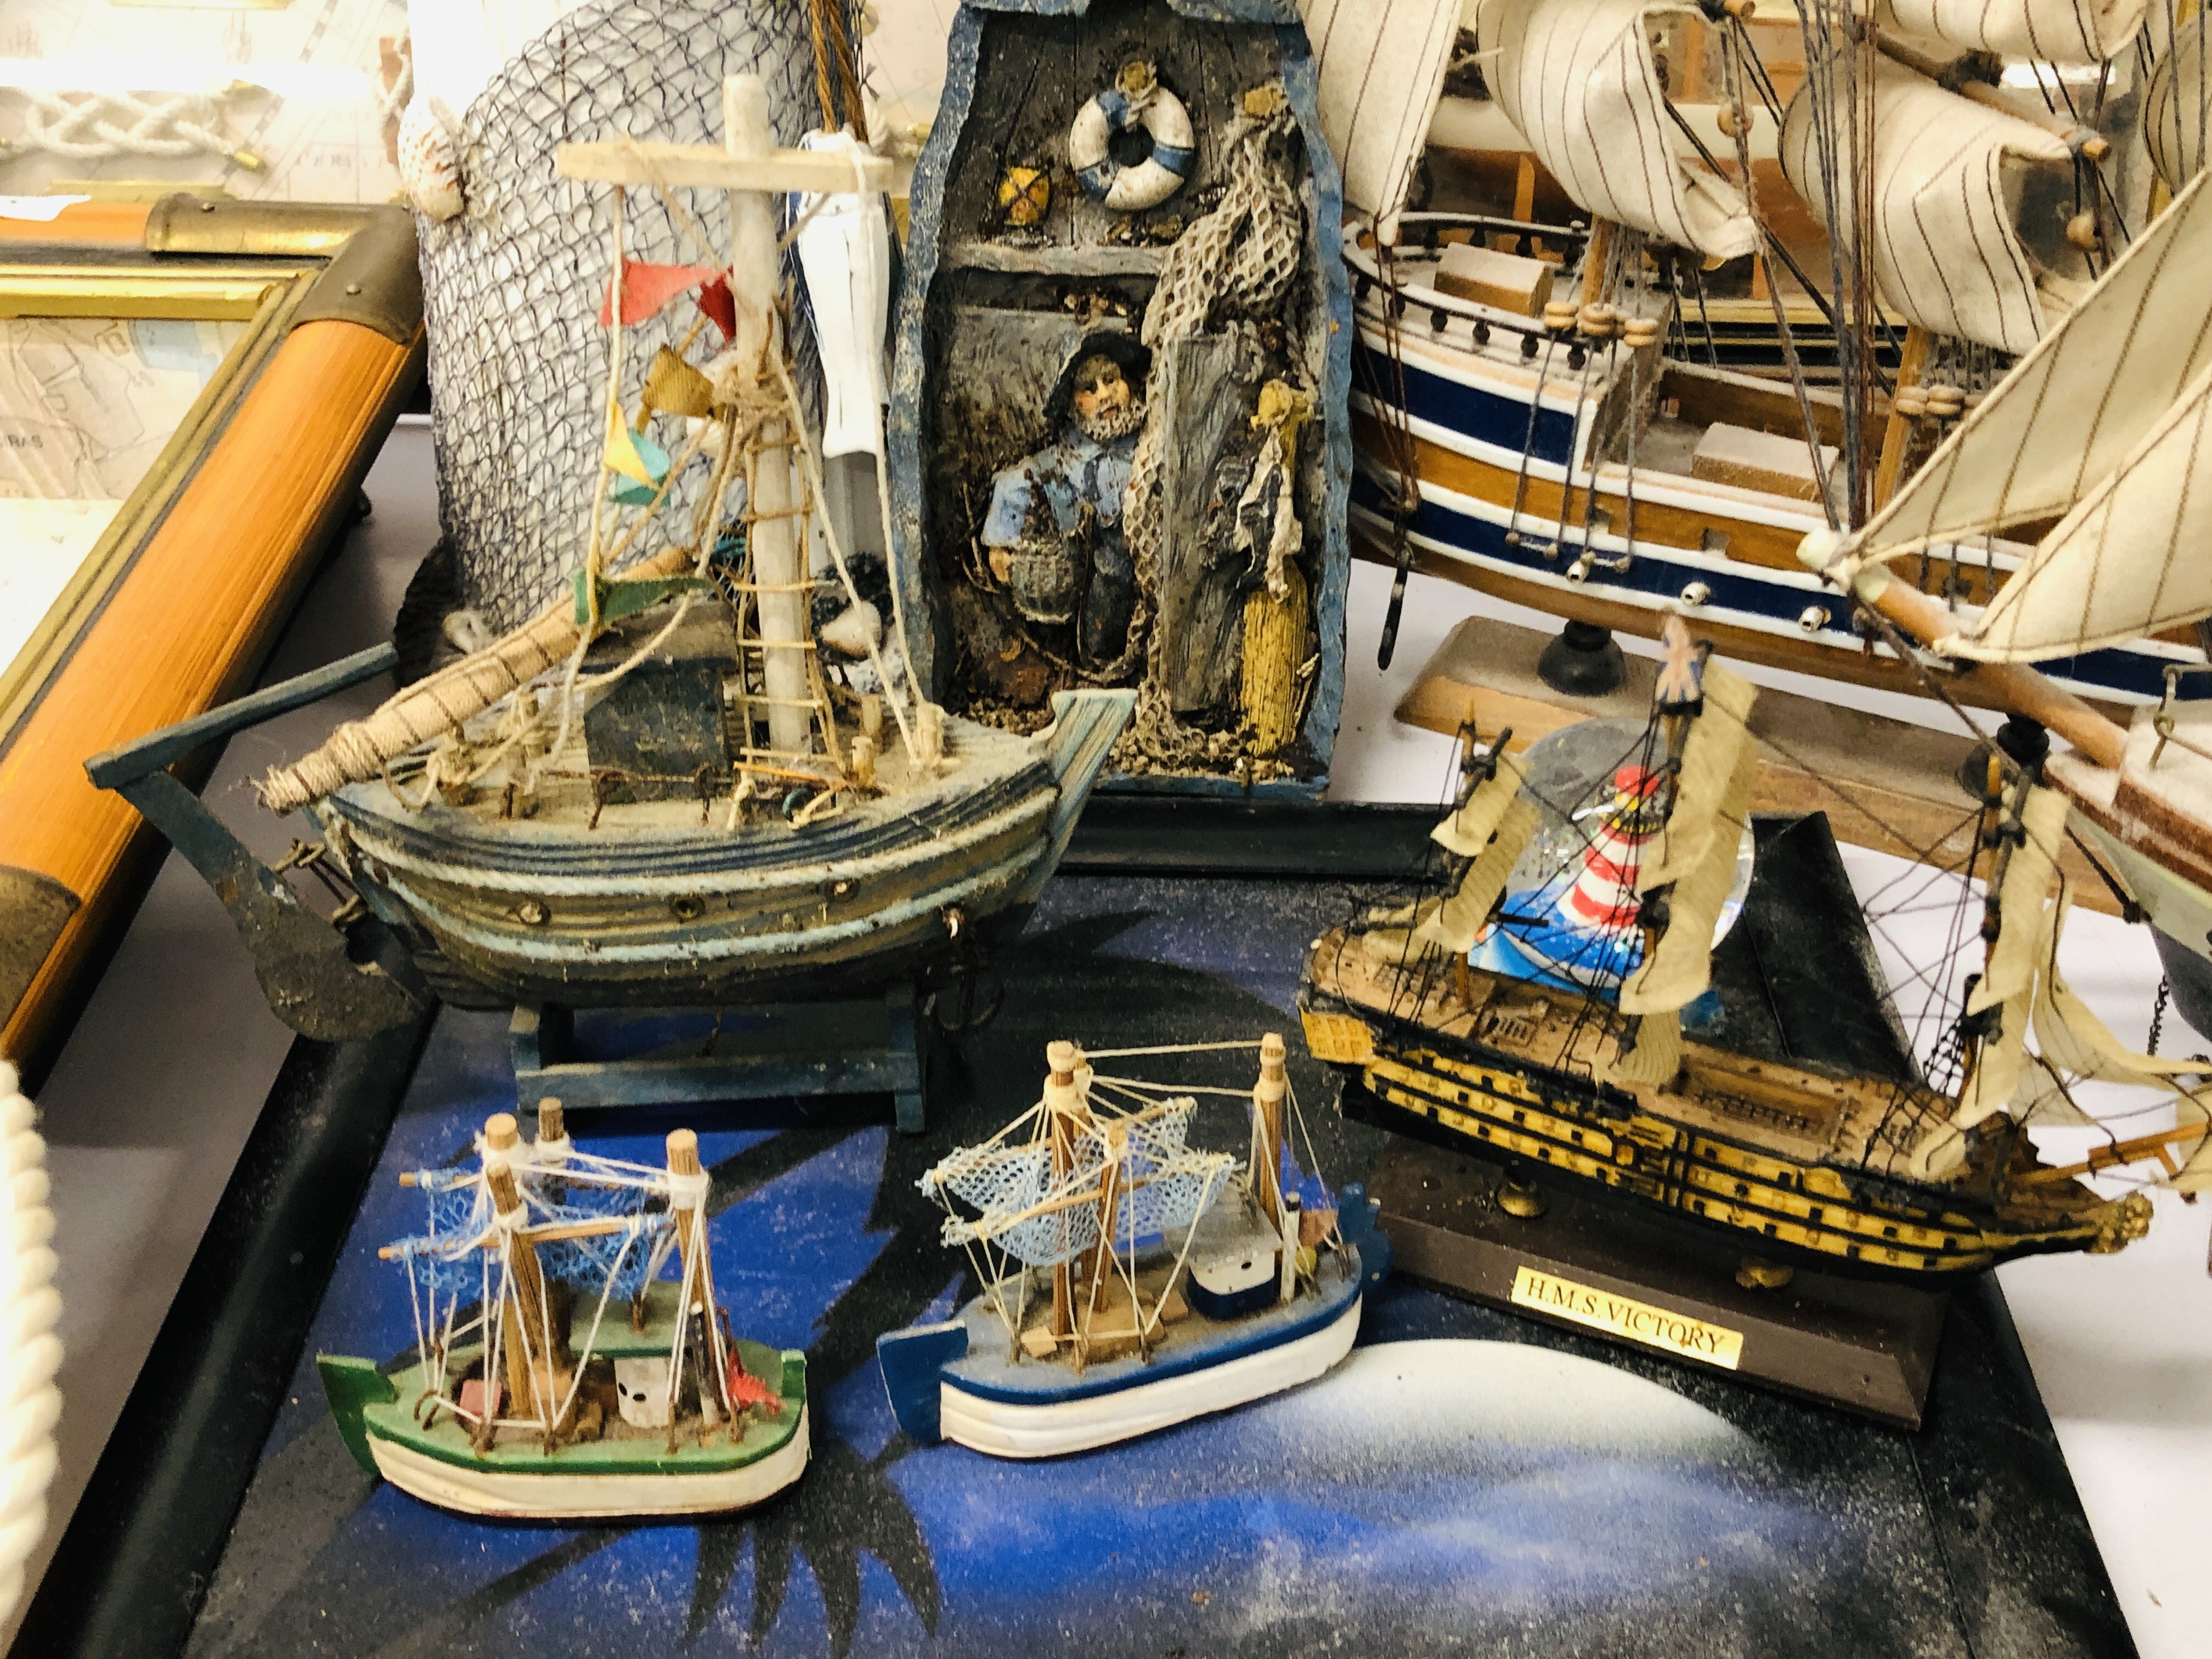 3 NAUTICAL 3D CASED DISPLAYS AND OTHER NAUTICAL ITEMS TO INCLUDE SAILING SHIPS, LIGHTHOUSES ETC. - Image 5 of 11